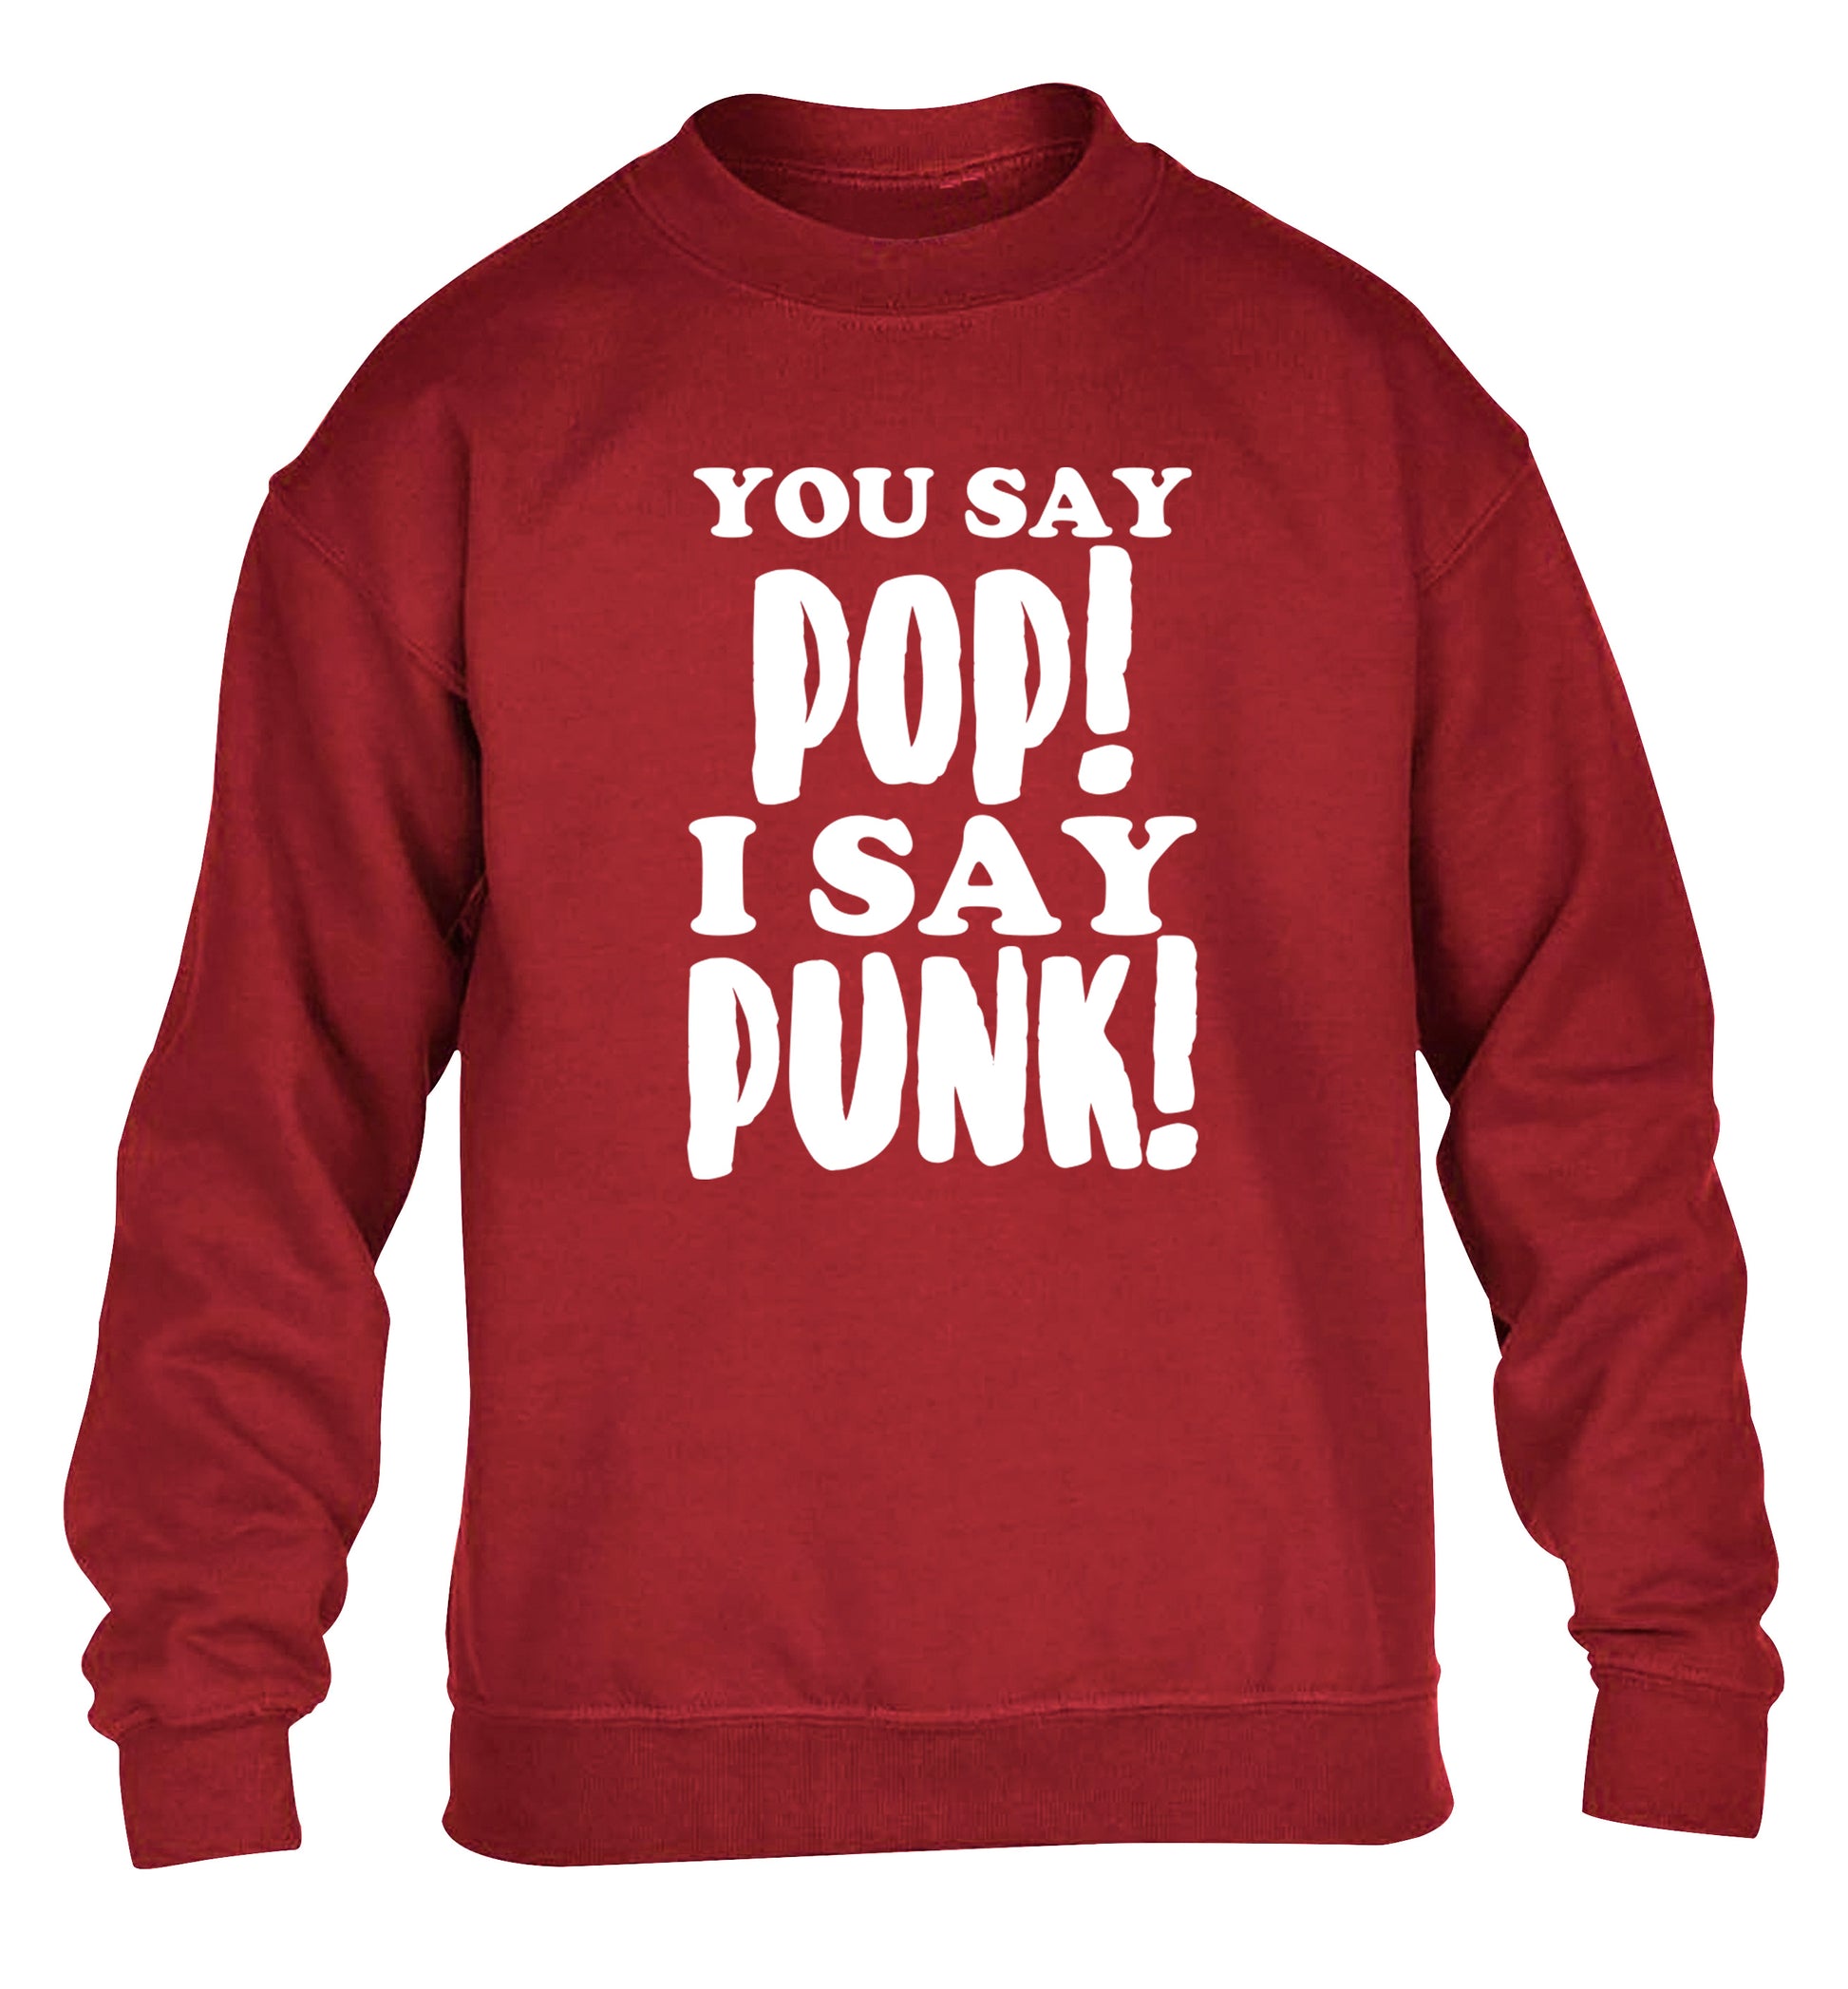 You say pop I say punk! children's grey sweater 12-14 Years